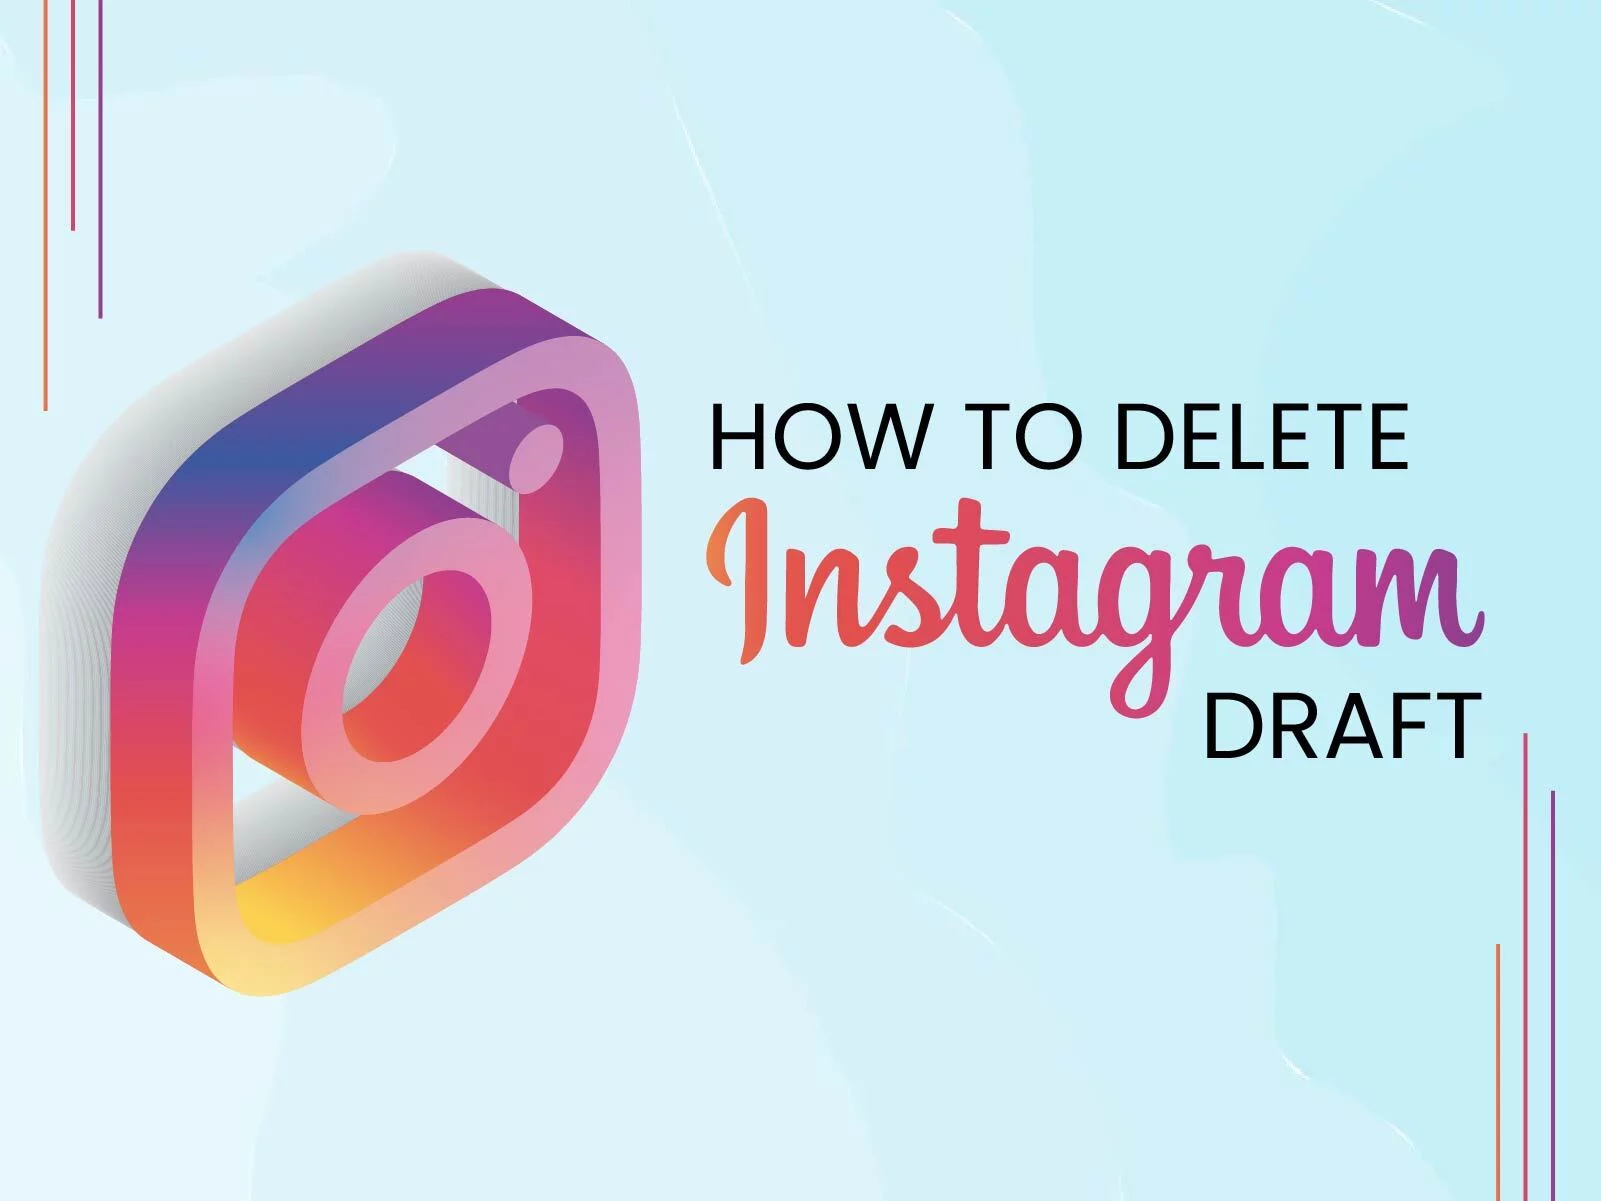 How to delete Instagram drafts?